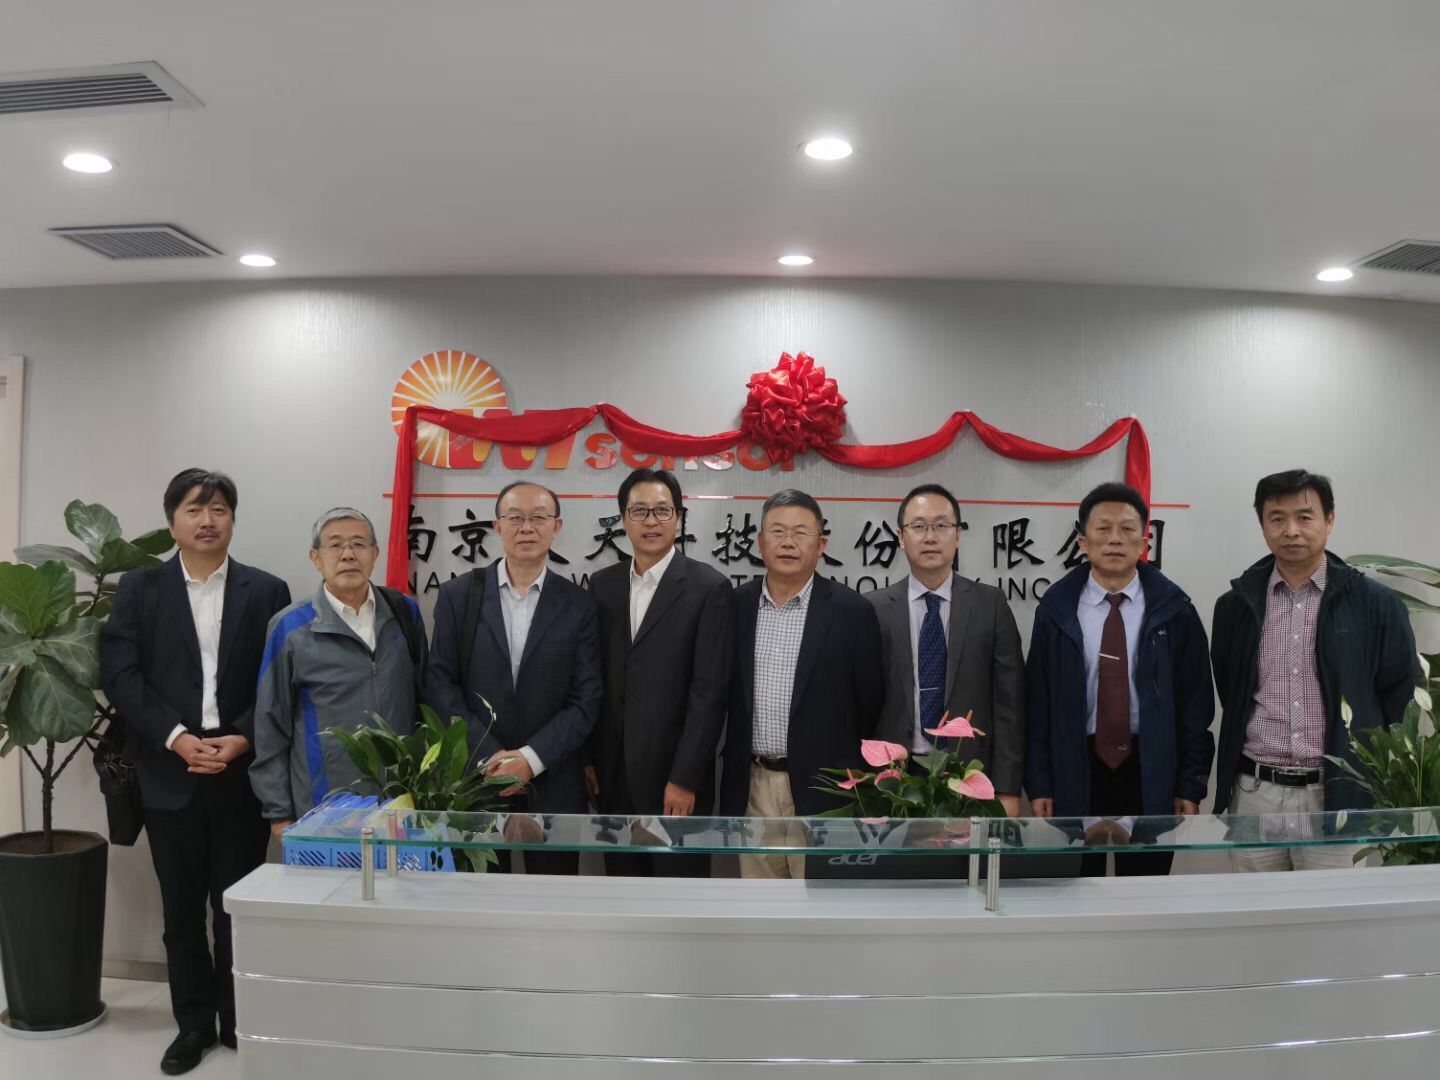 Nanjing Wotian participated in the 13th Shanghai International Water Treatment Exhibition